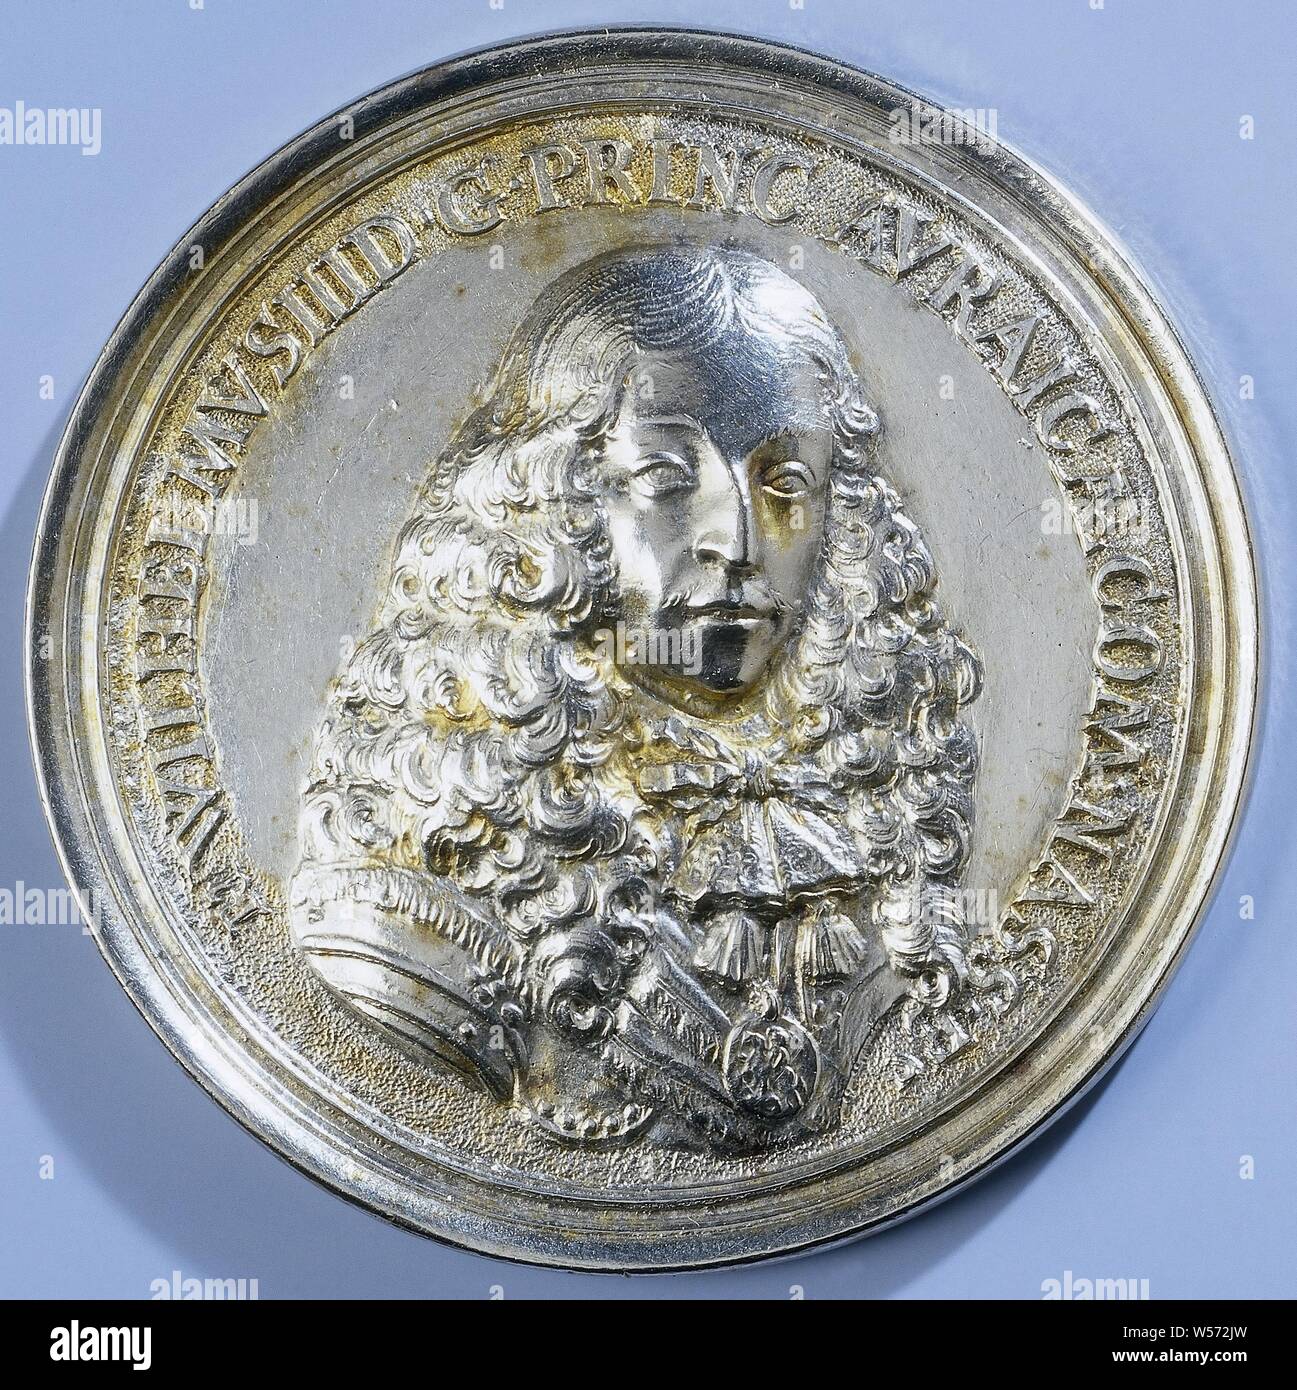 Elevation of William III as commander-in-chief of the country and naval power, Silver Medal. Front: man's bust inside the inside. Reverse: crowned coat of arms, hanging with order of Kousebandt., William III (Prince of Orange and King of England, Scotland and Ireland), Order of the Garter, Pieter van Abeele (copy after), Amsterdam, 1672 and/or 1677, silver (metal), striking (metalworking), d 7 cm × w 743 Stock Photo